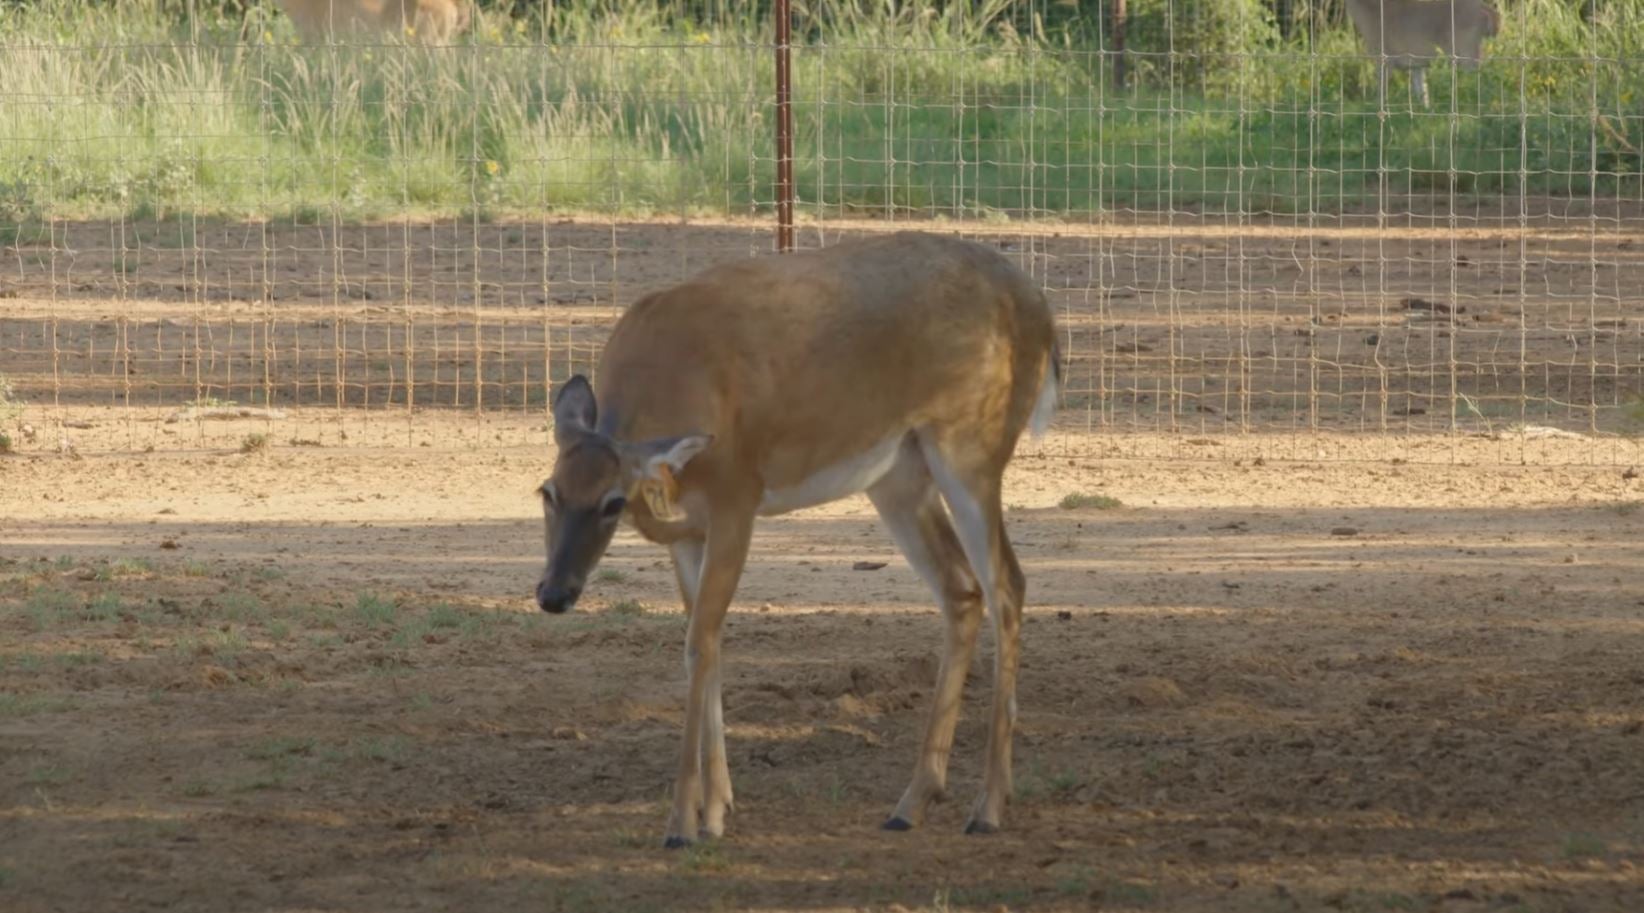 Can CWD Be Solved? New Video from The High Road Group